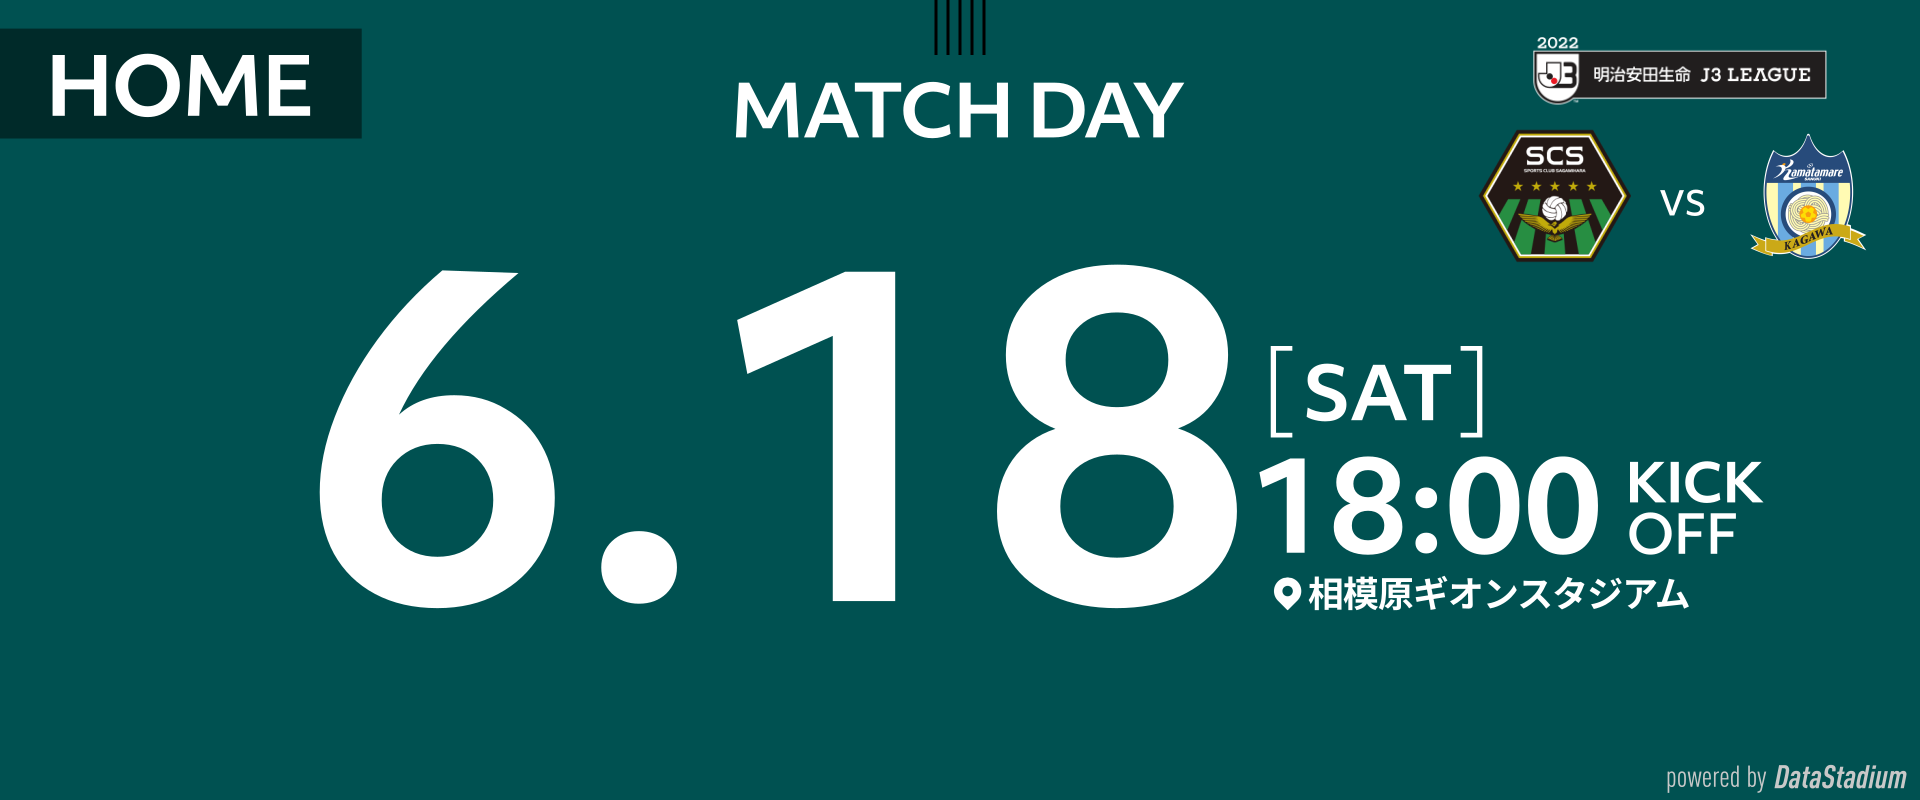 matchday_1920_800_20220618.png